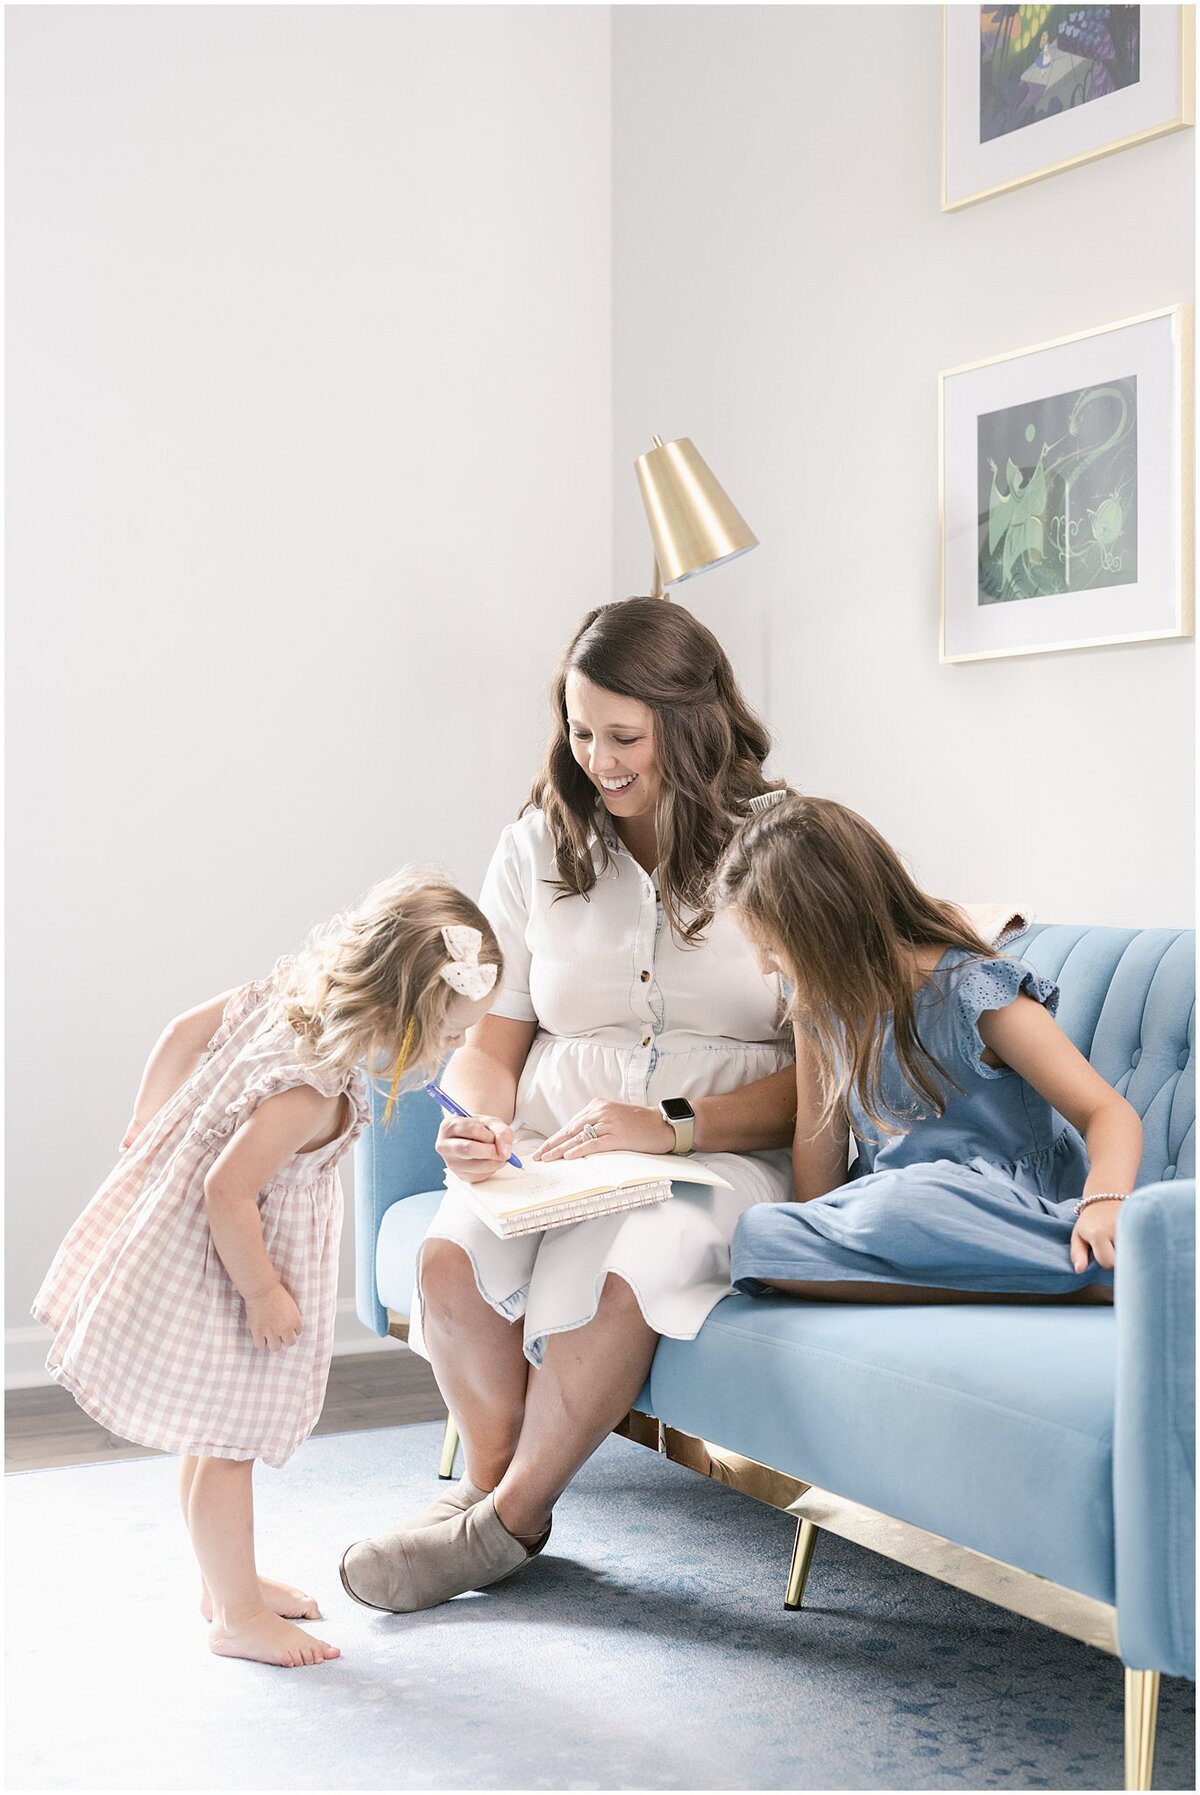 Stationery designer with her children in her home office